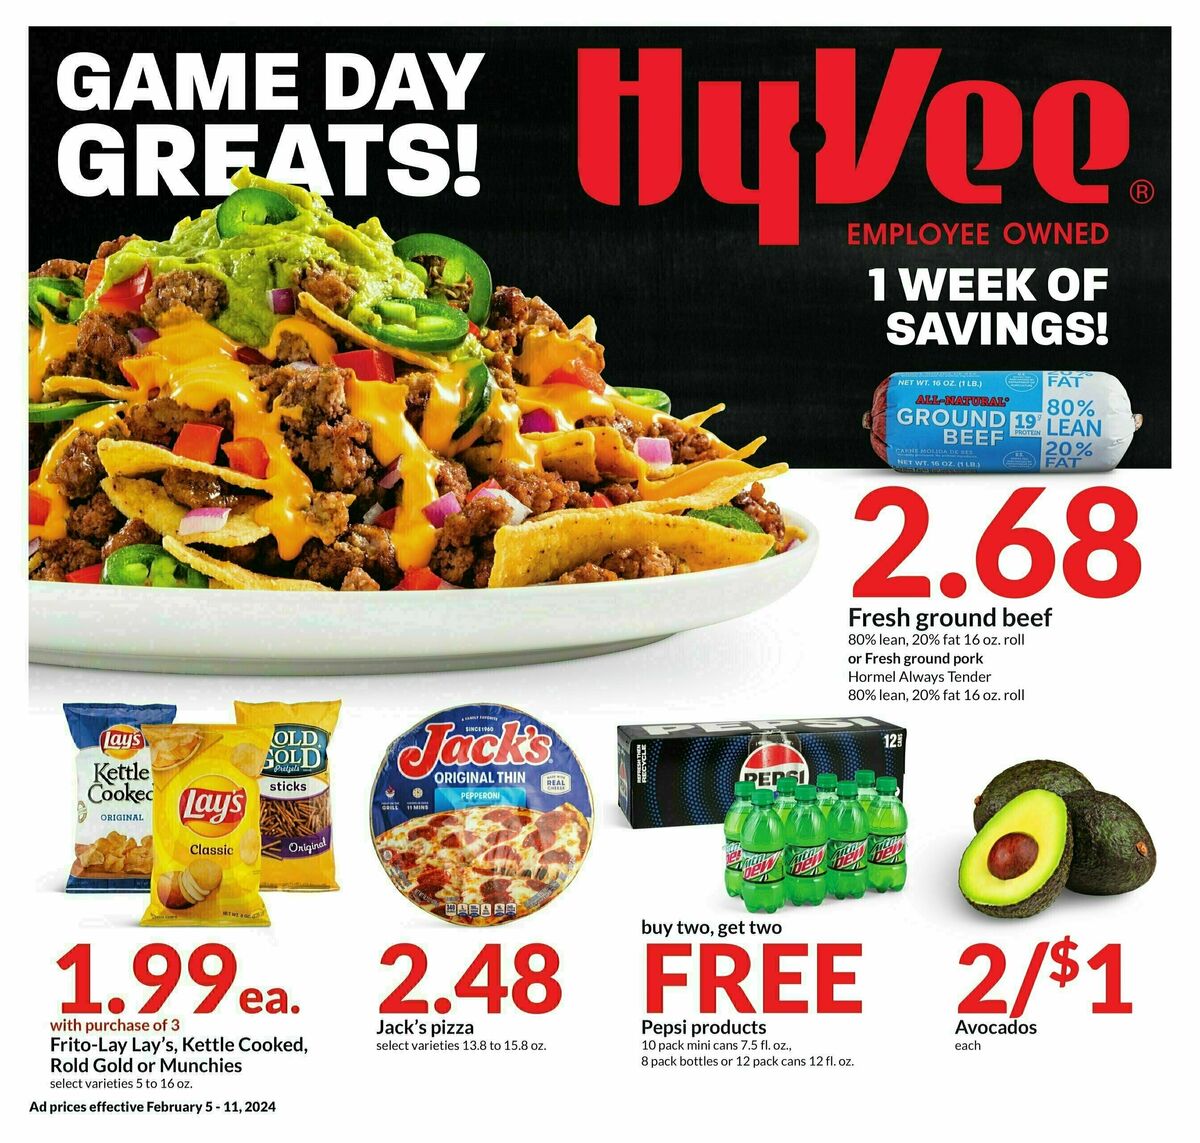 Hy-Vee Game Day Greets! Weekly Ad from February 5